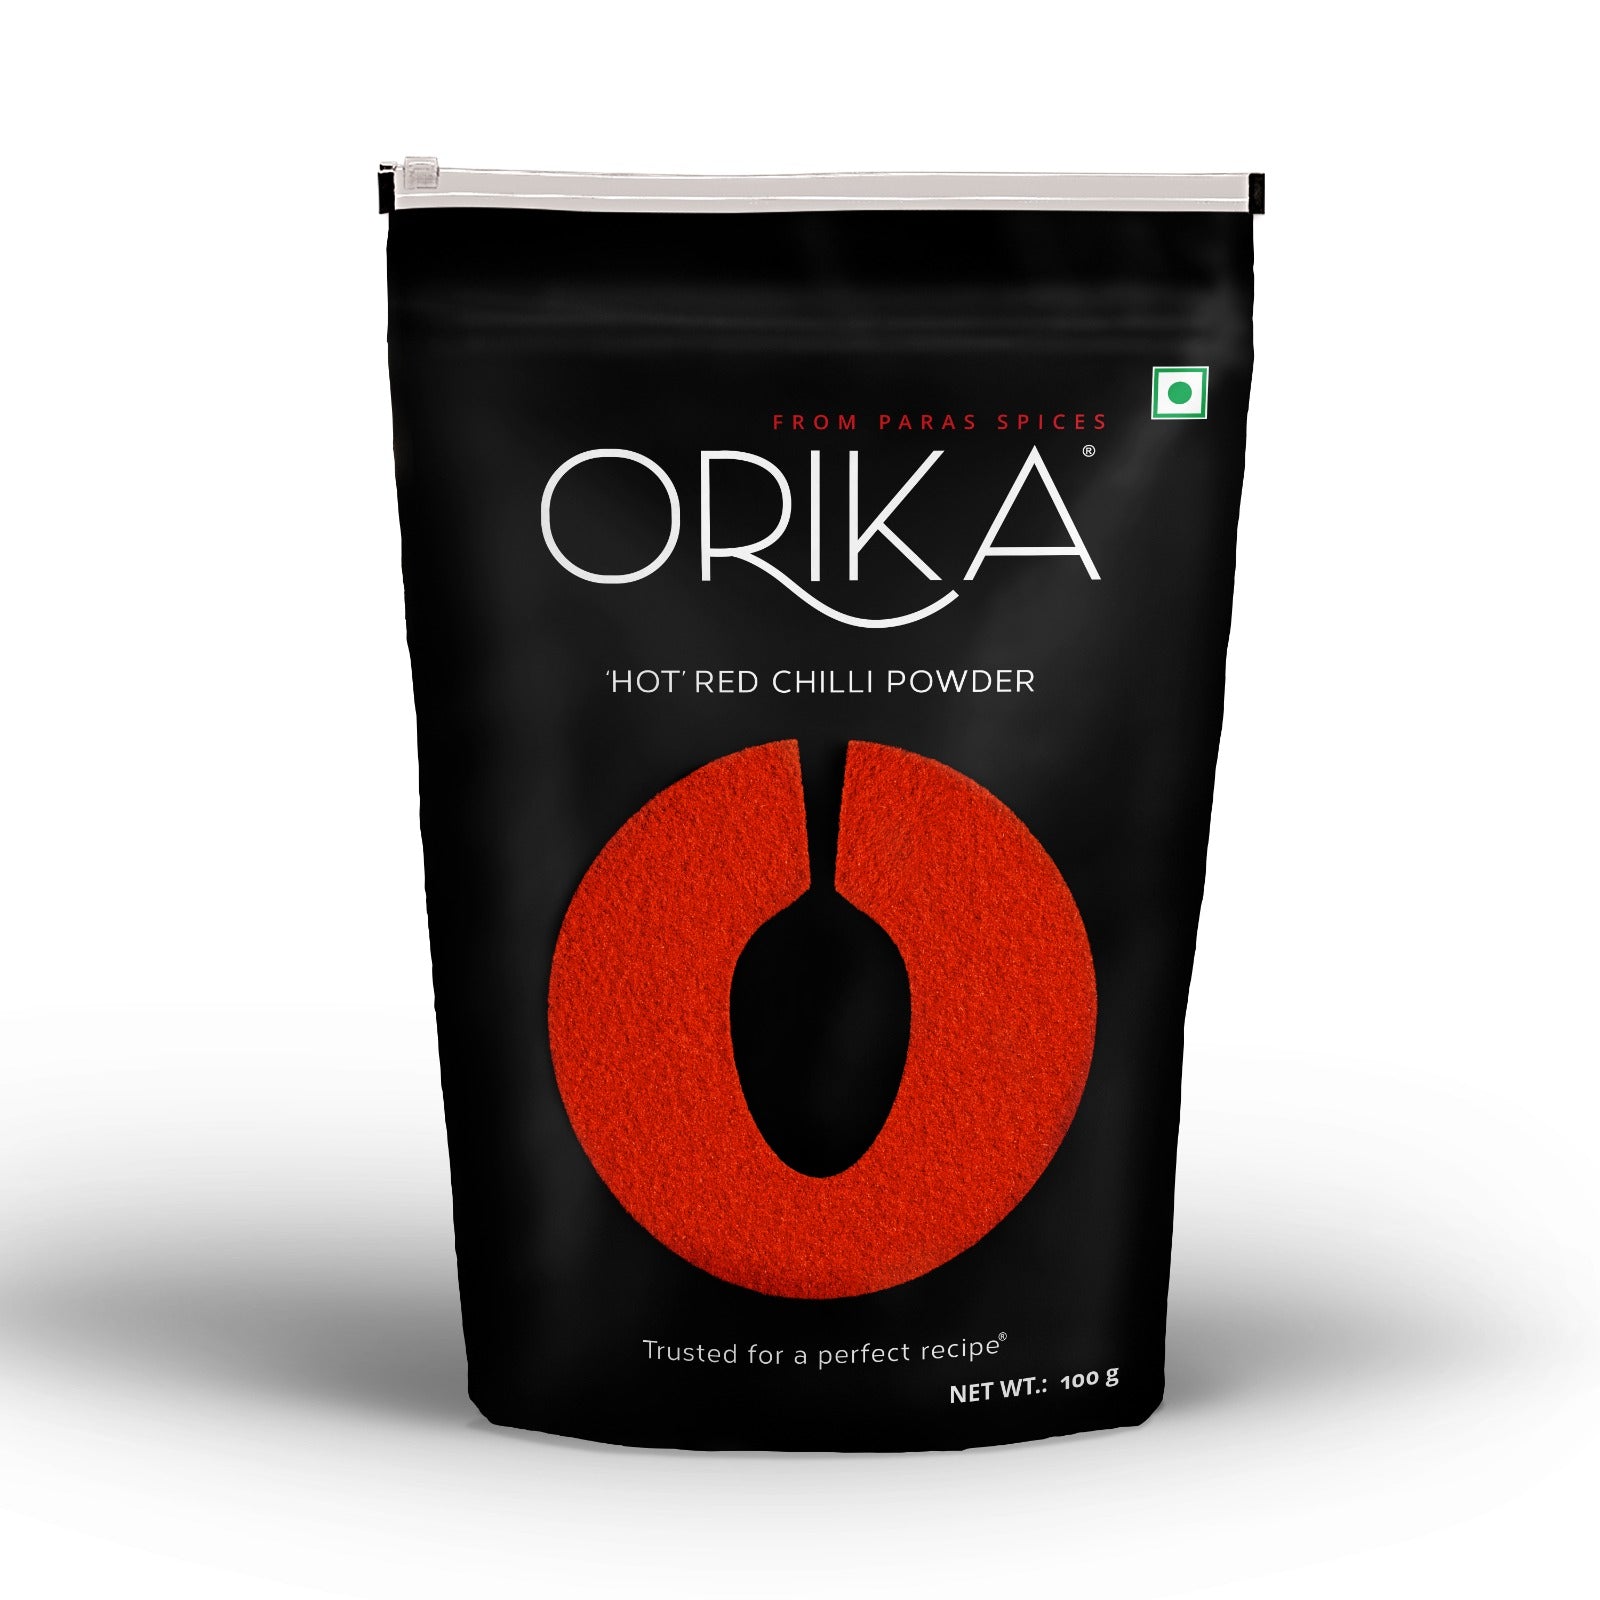 Monthly Veg Combo , Pack of 8, 100g each - Orika Spices India